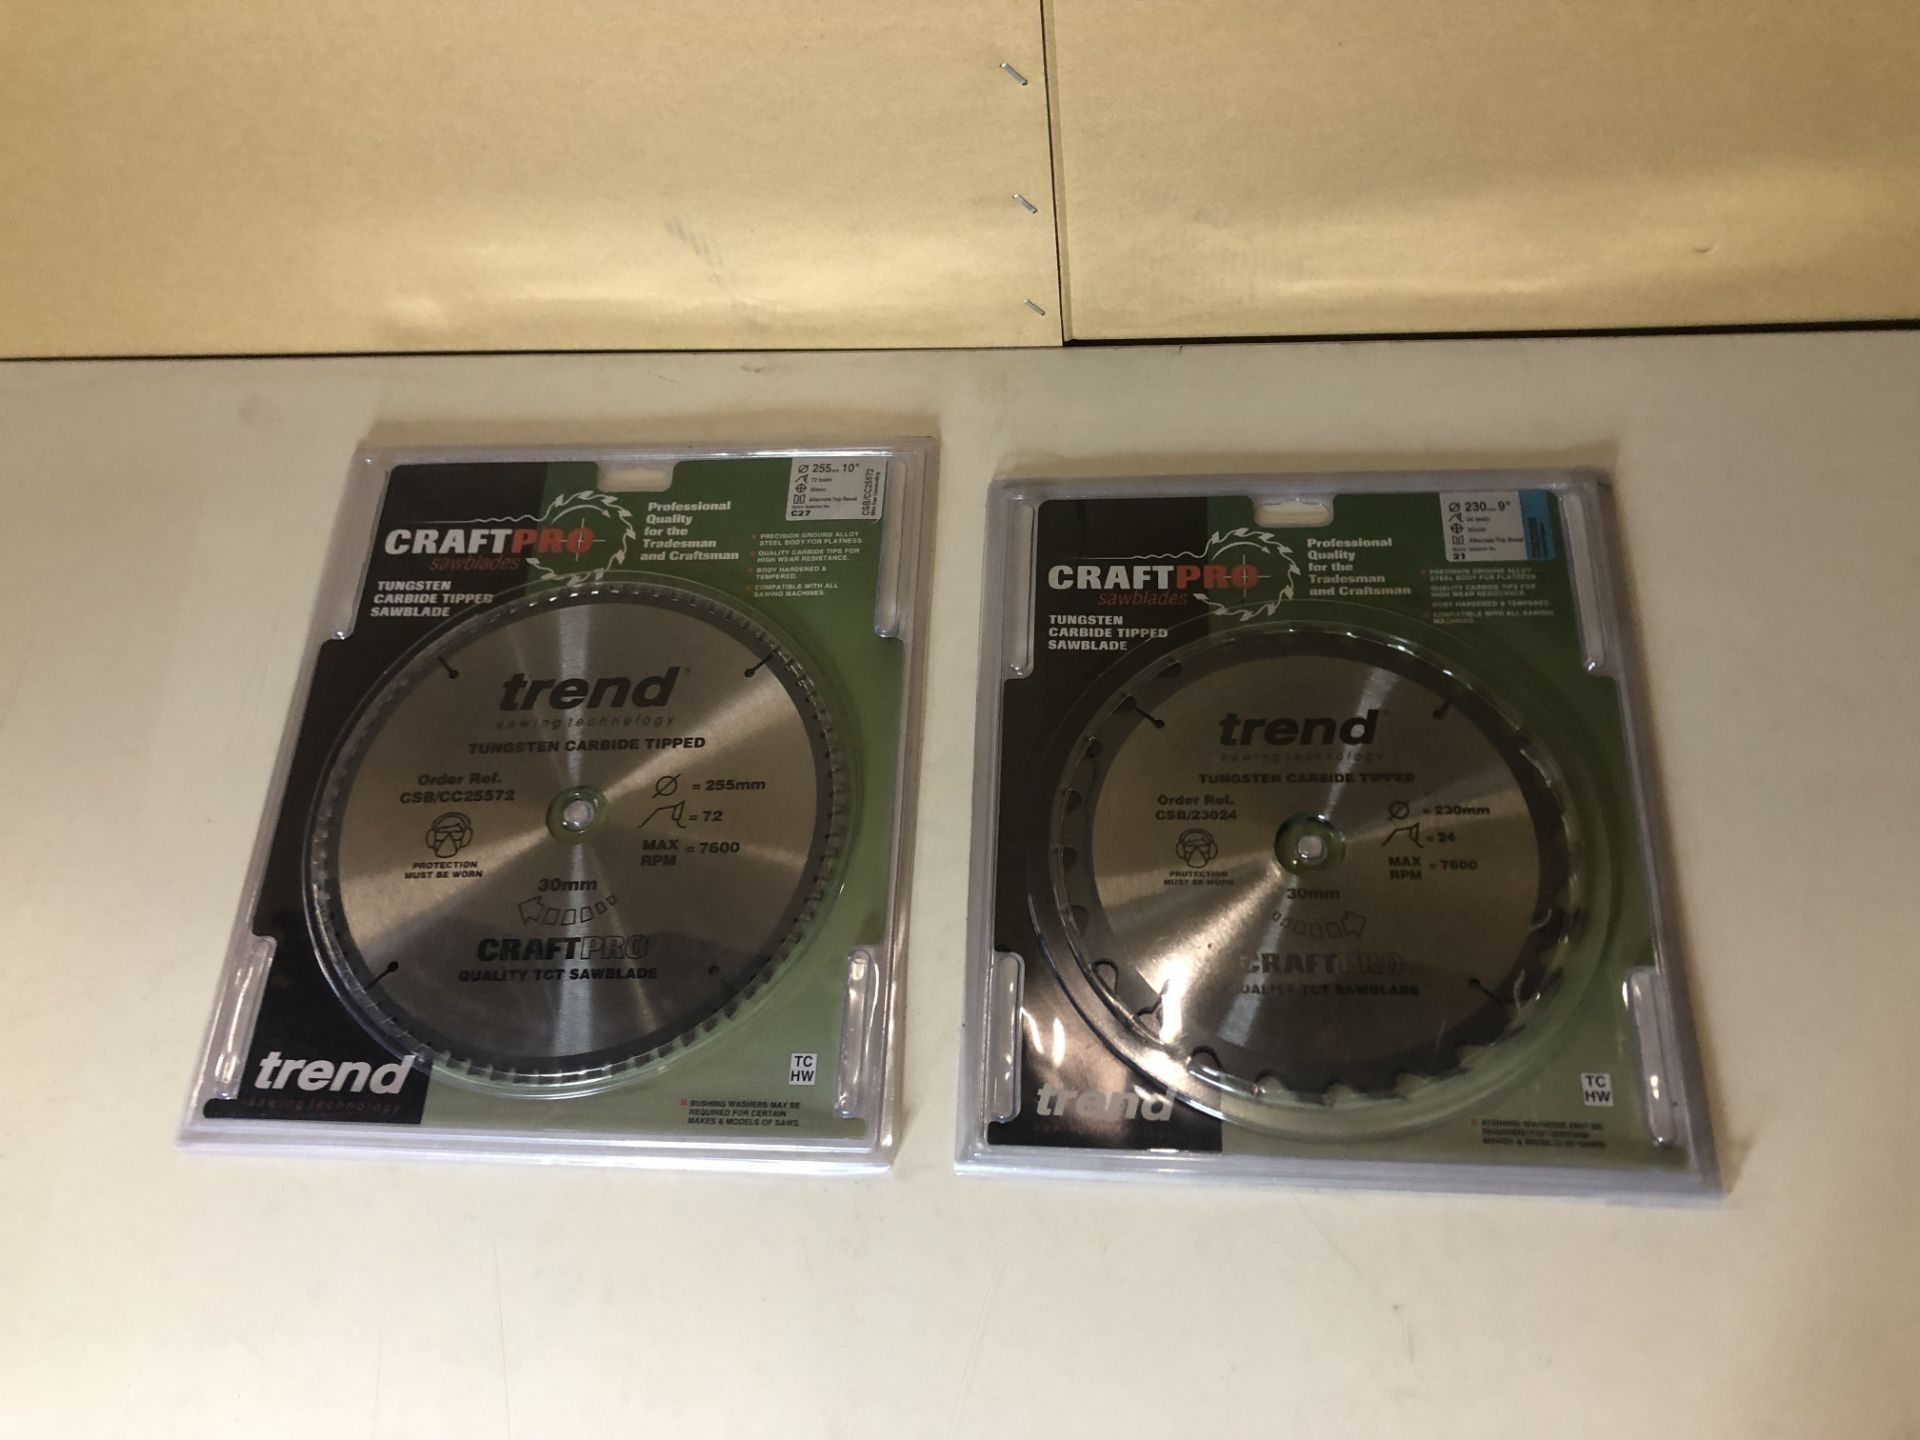 Mixed Lot Of Trend Craft Pro Saw Blades. See description. - Image 3 of 3